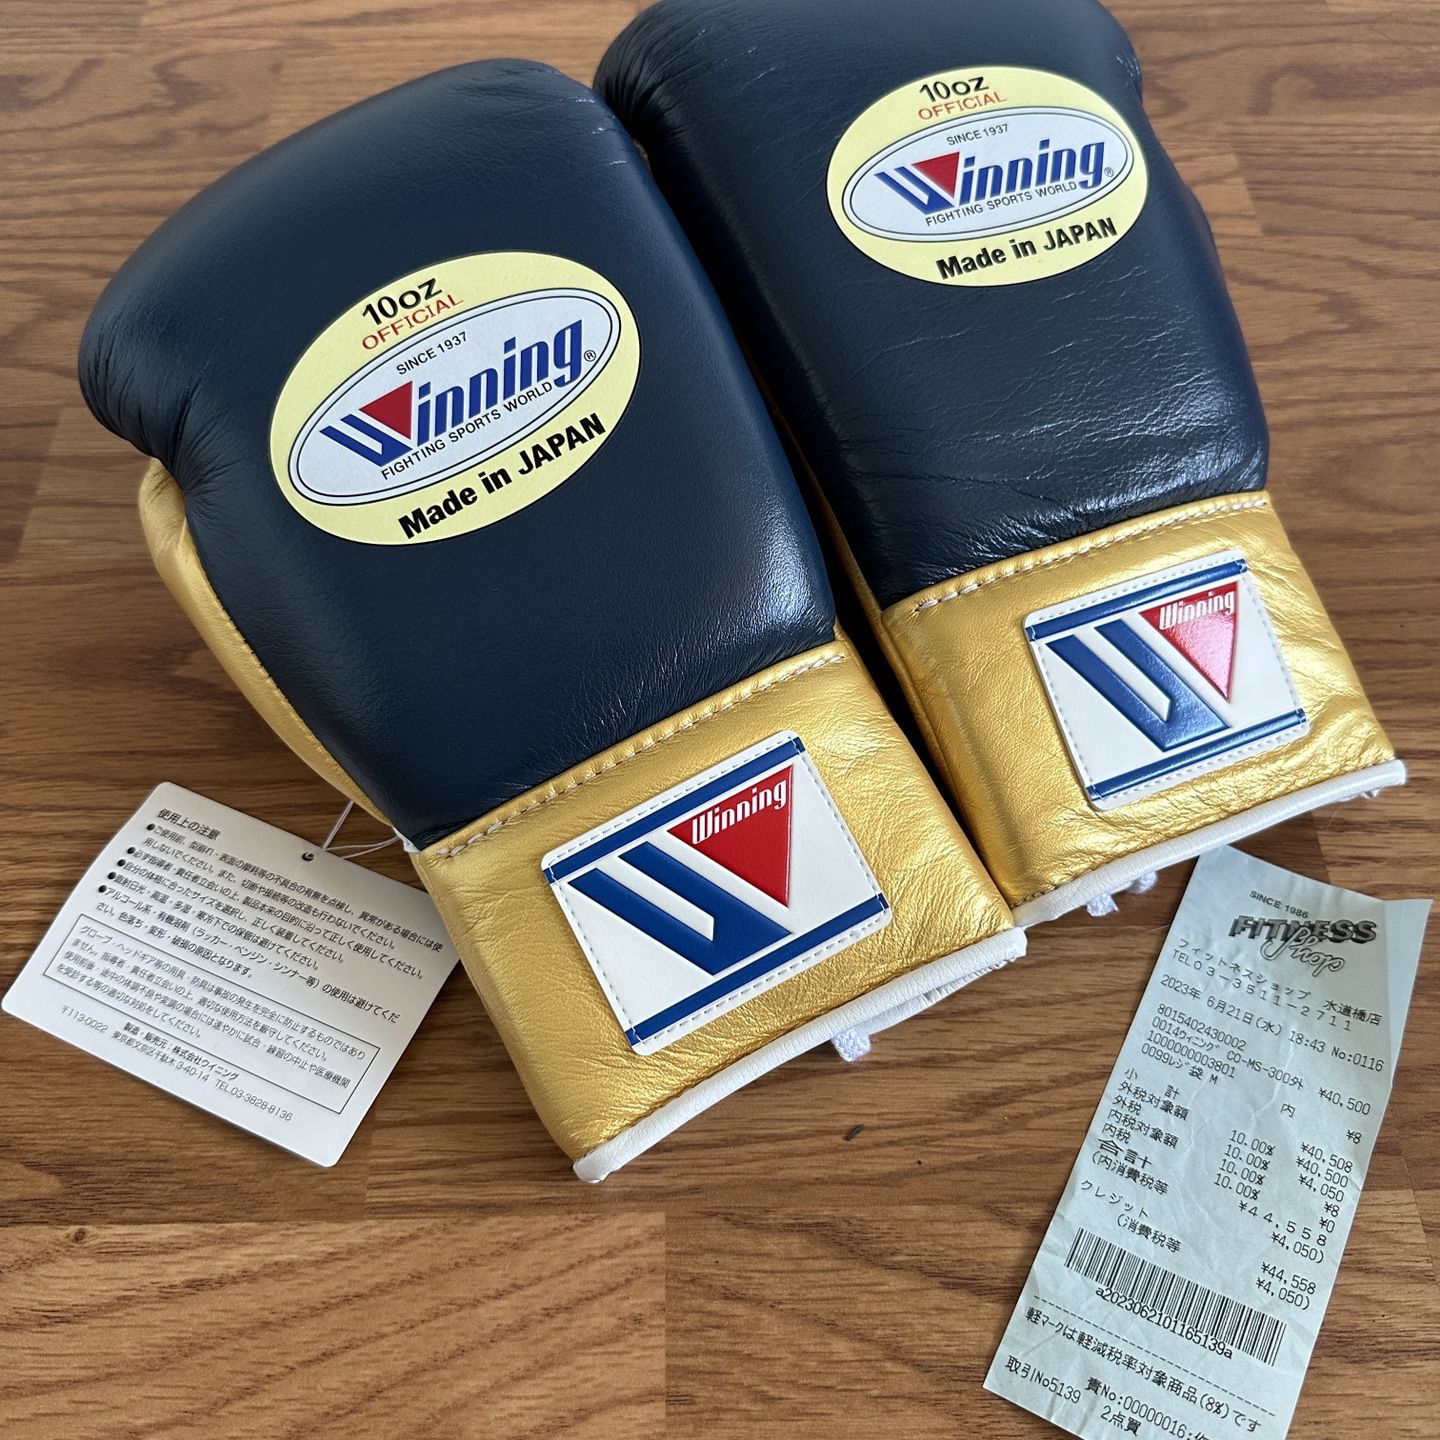 BRAND NEW) Winning Boxing Gloves (10oz. Custom Navy/Gold, Lace-Up